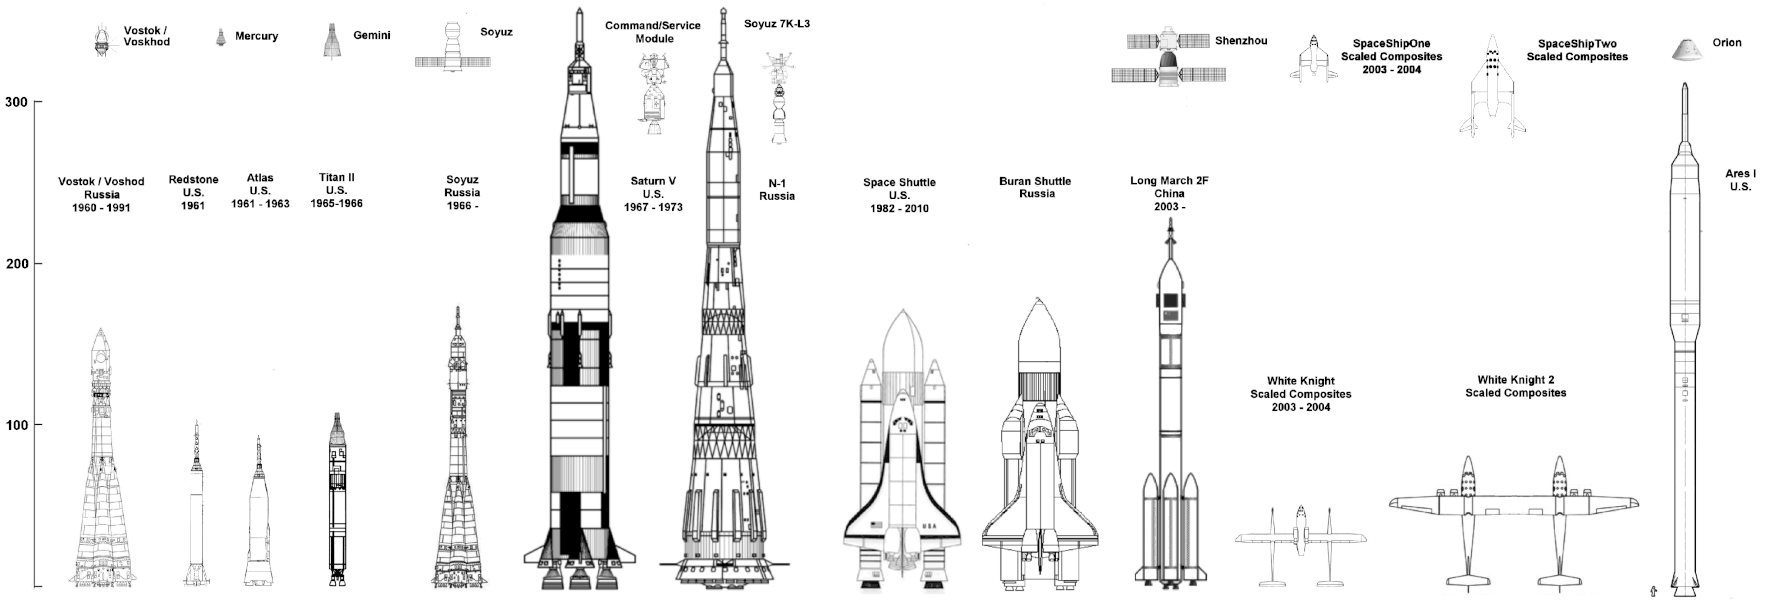 Scaled comparison of crewed spacecraft, including names, manufacturers, and dates of operation